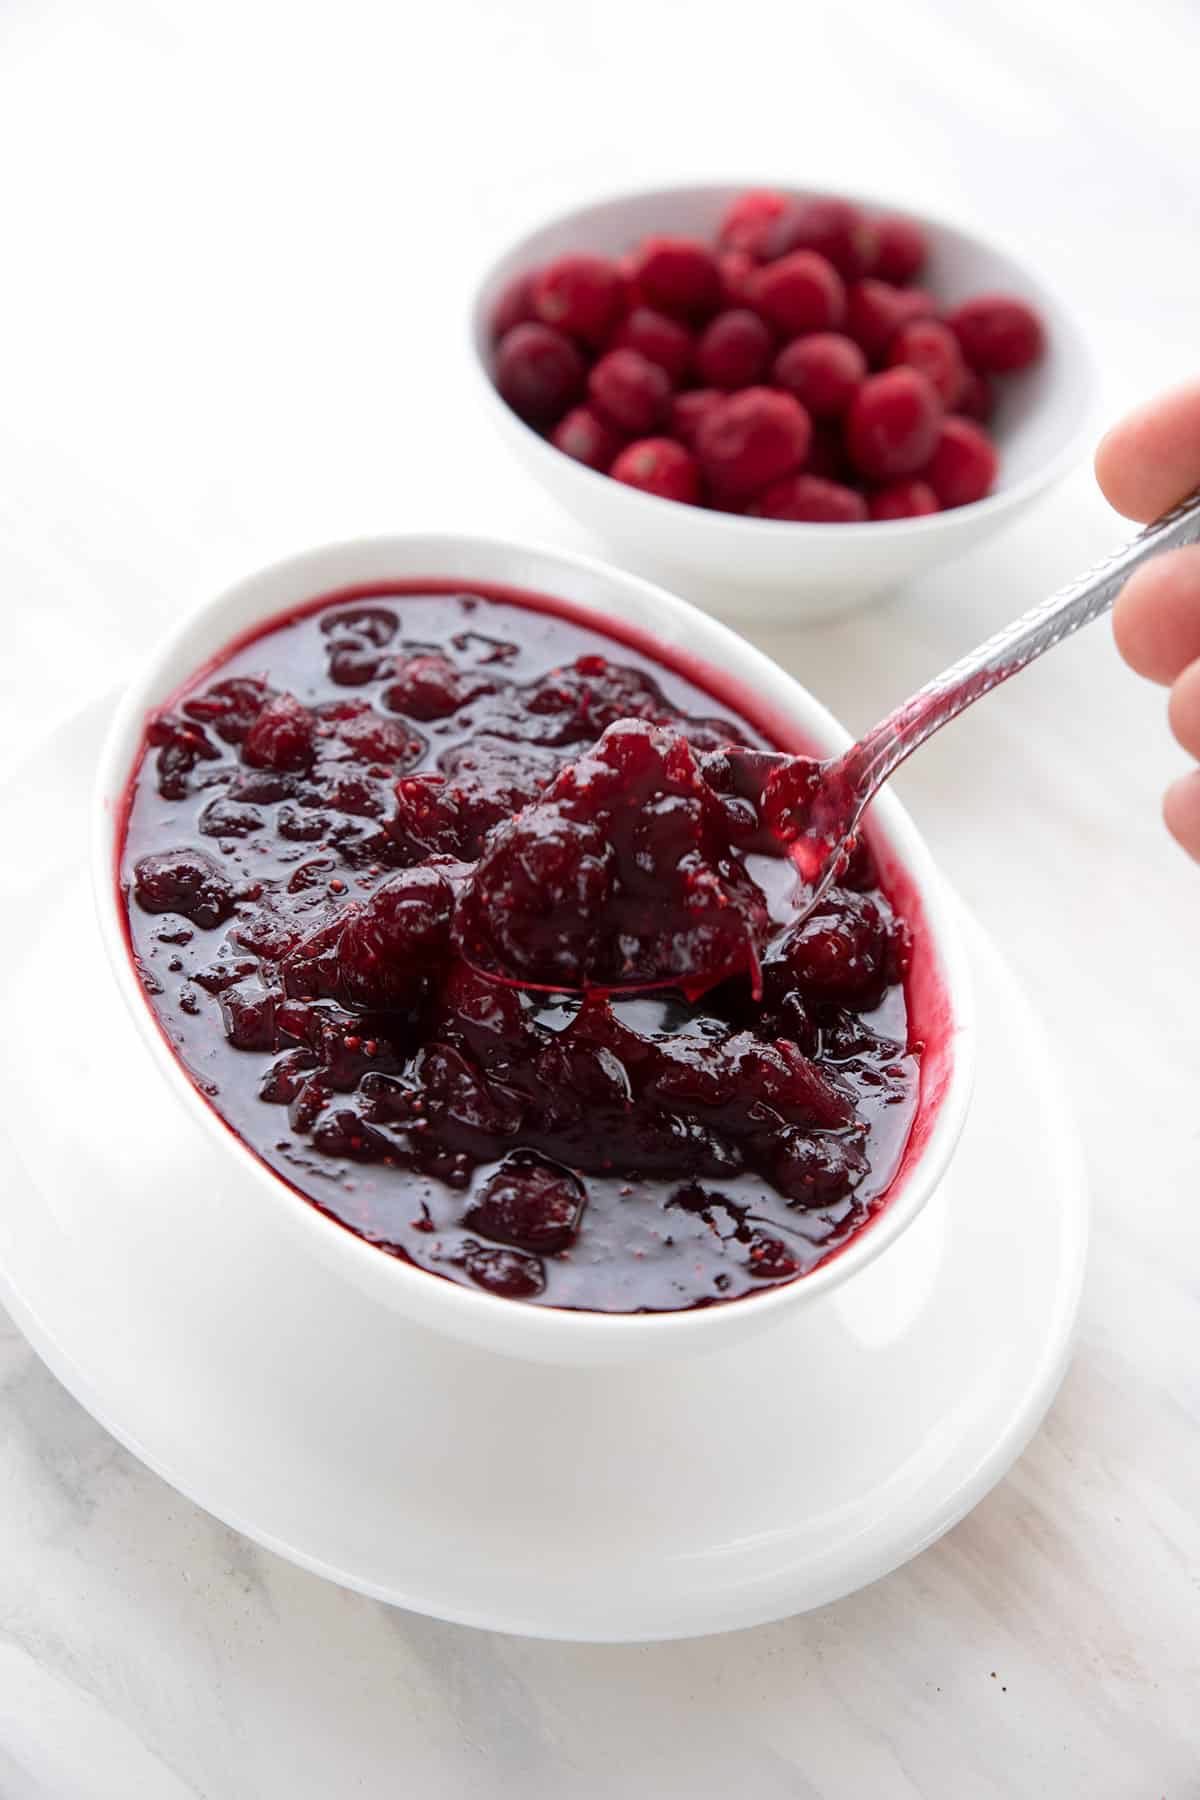 A spoon digging into sugar free cranberry sauce with a bowl of cranberries in the background.